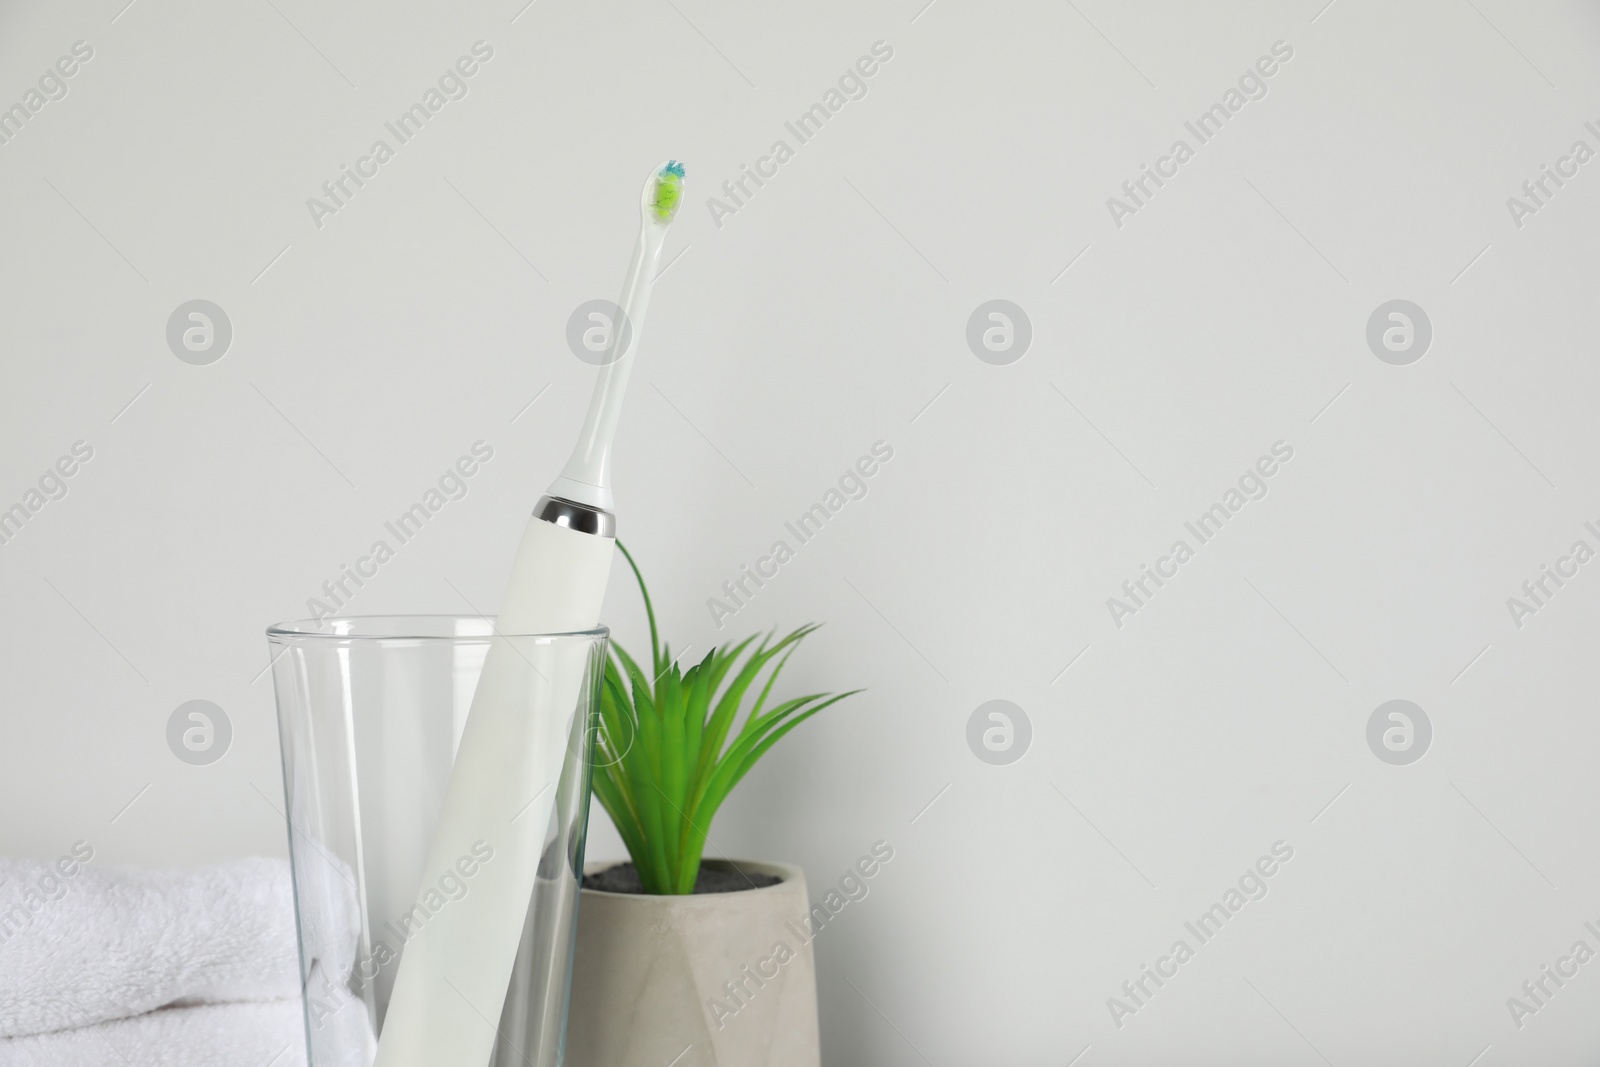 Photo of Electric toothbrush in glass and green houseplant on light background. Space for text